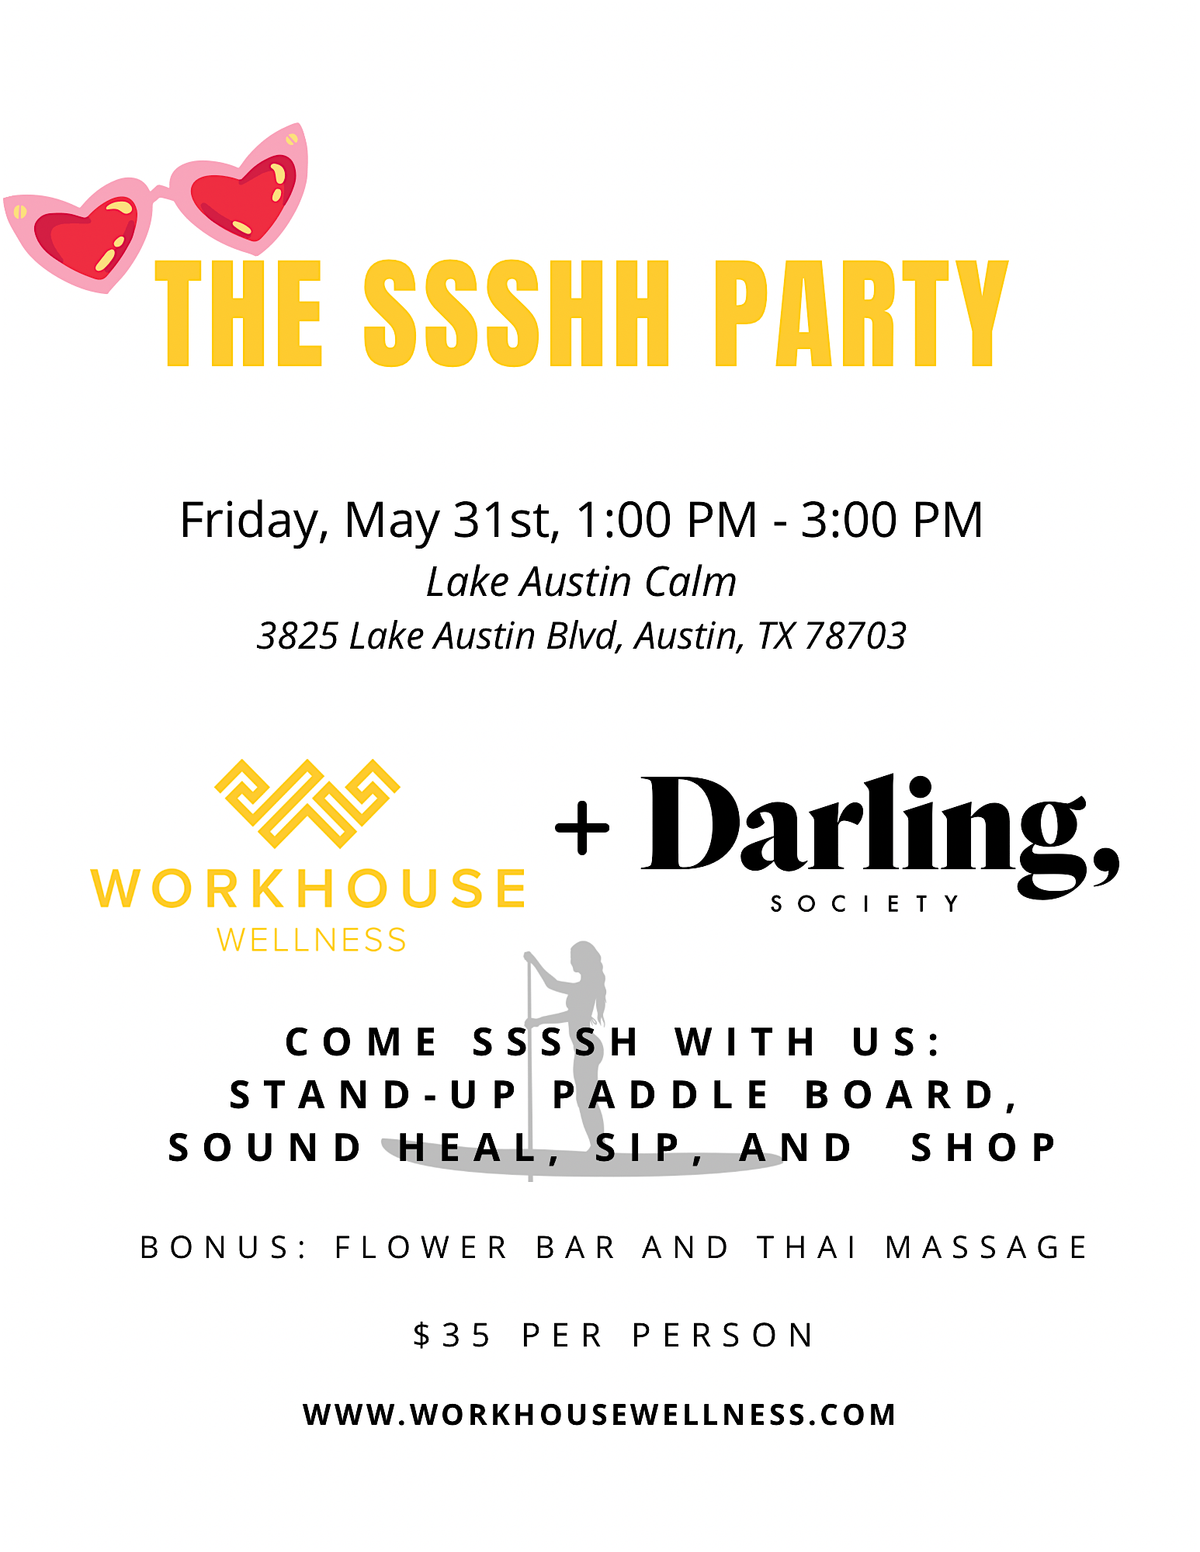 The Ssshh Party